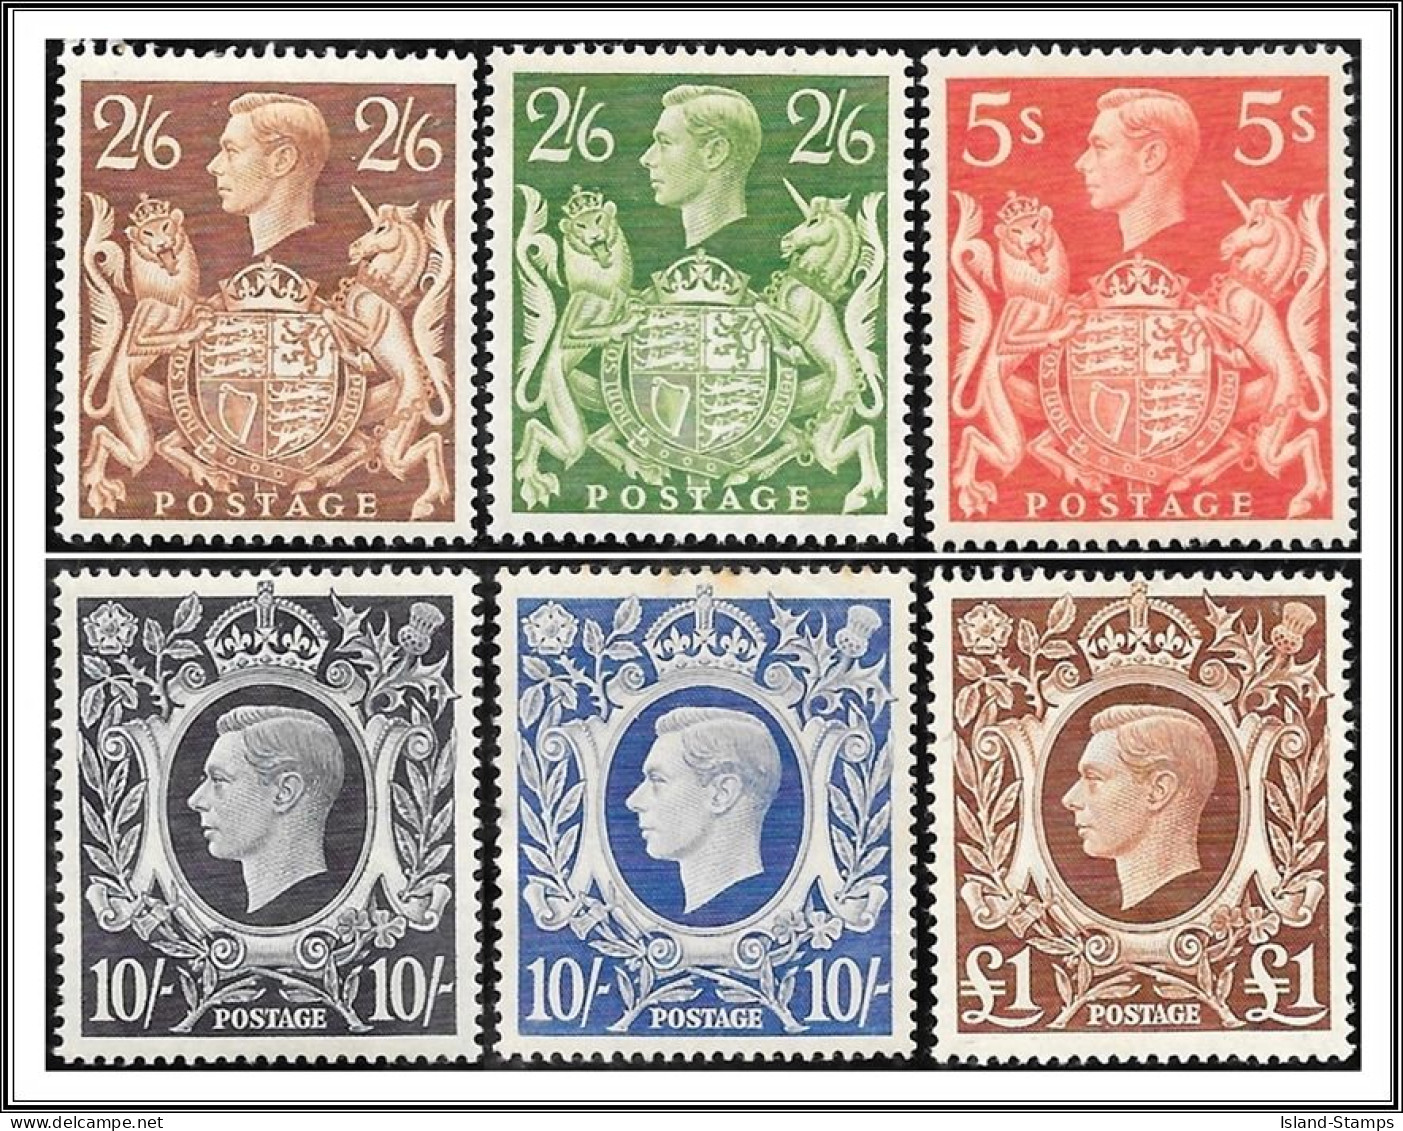 KGVI High-Value Set Of 6 Stamps To £1 SG476-478c Mounted Mint - Unused Stamps